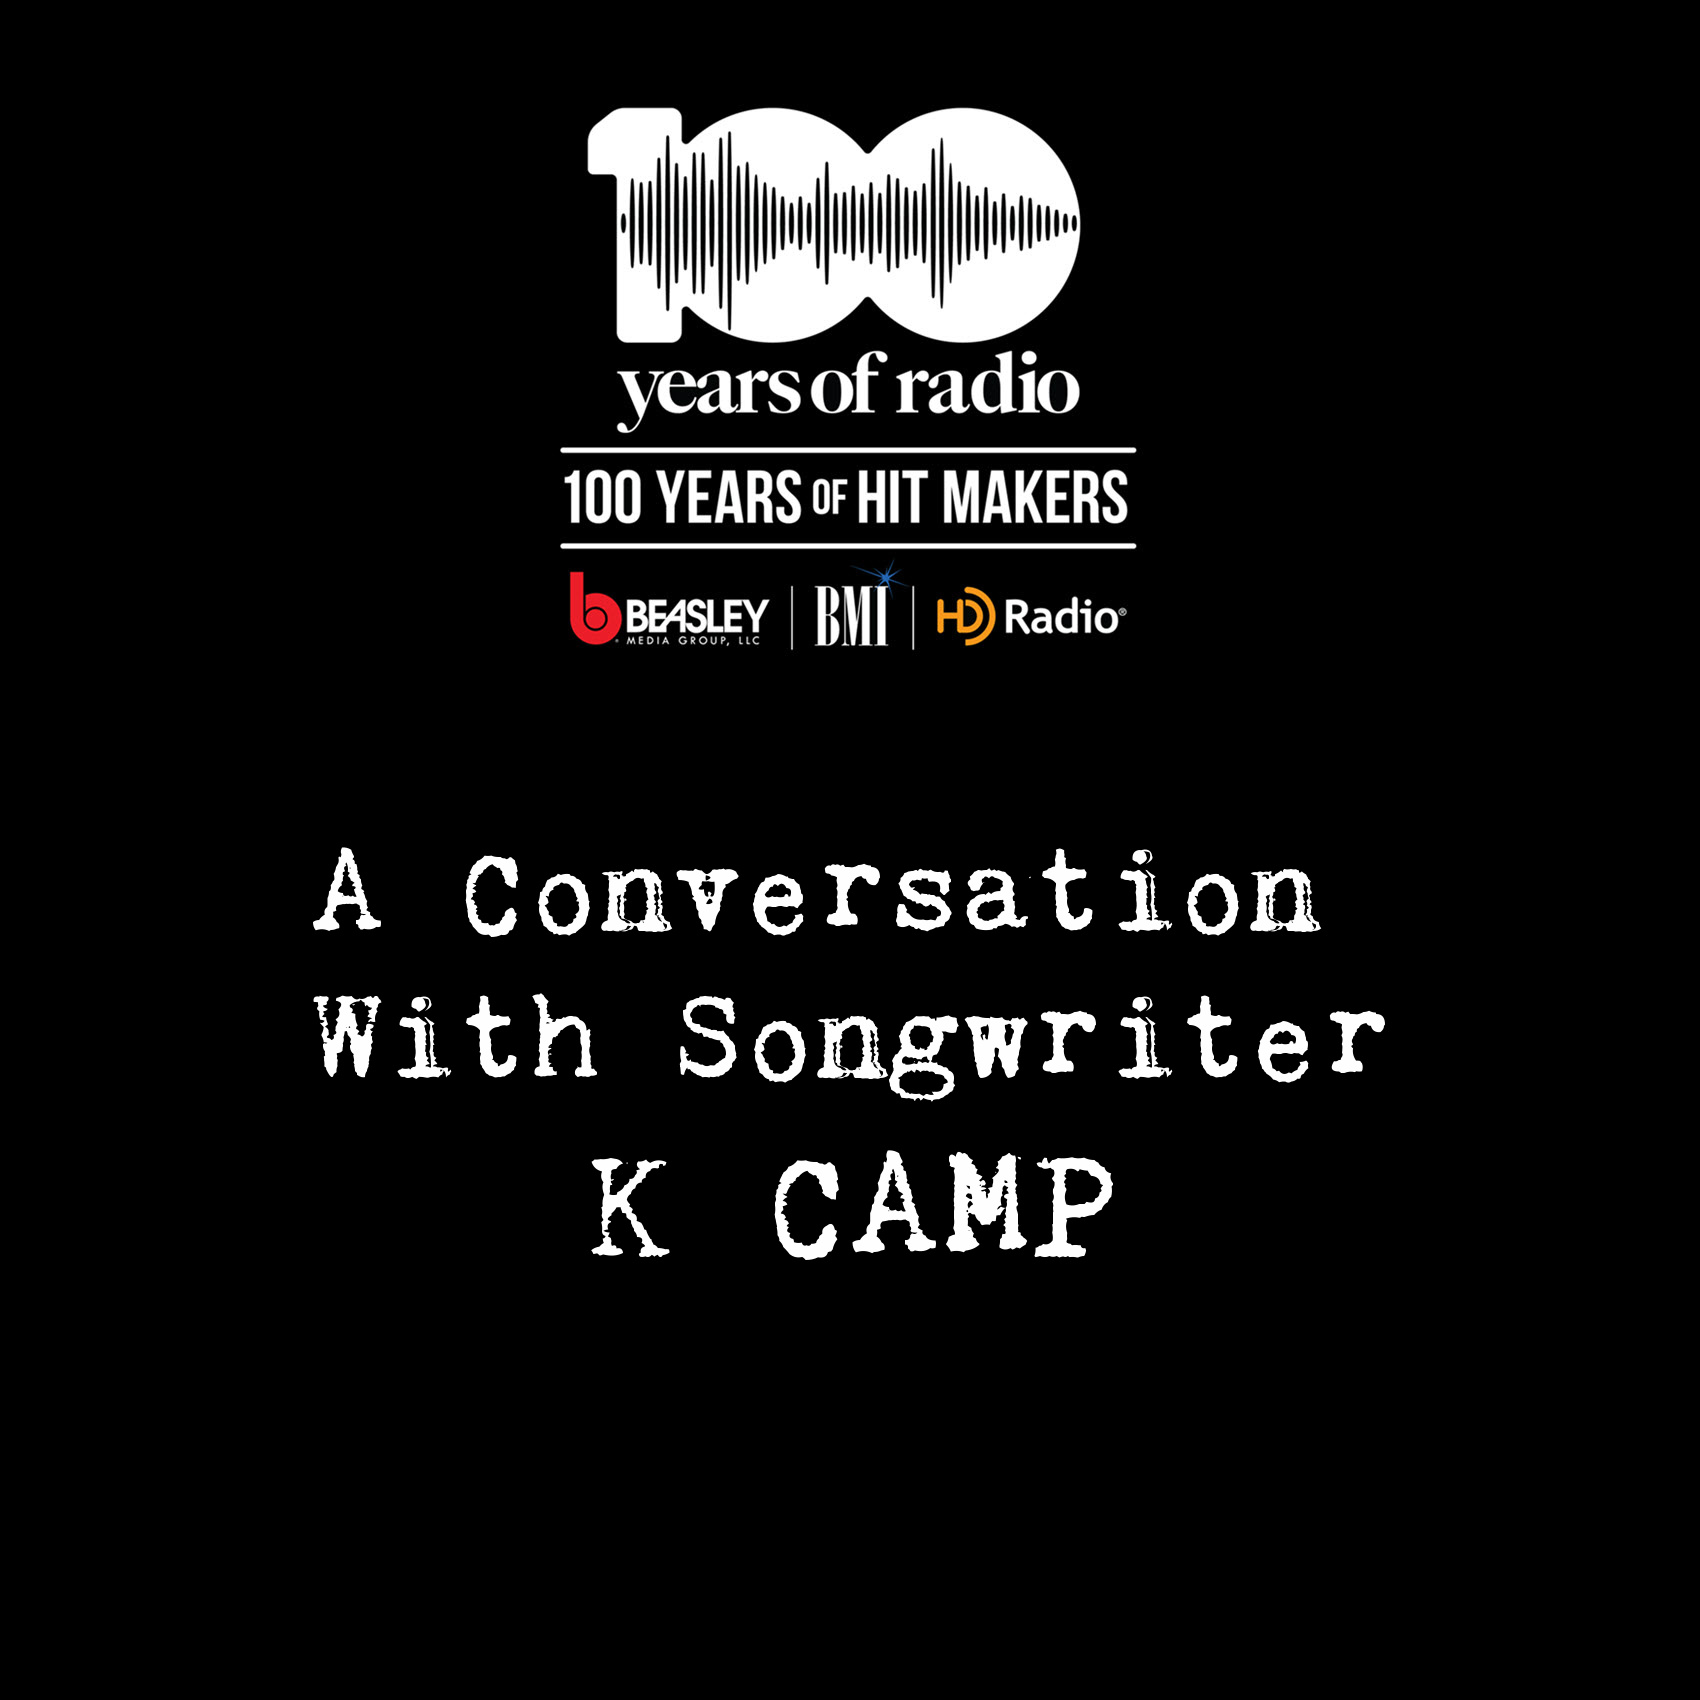 Interview with Songwriter K CAMP